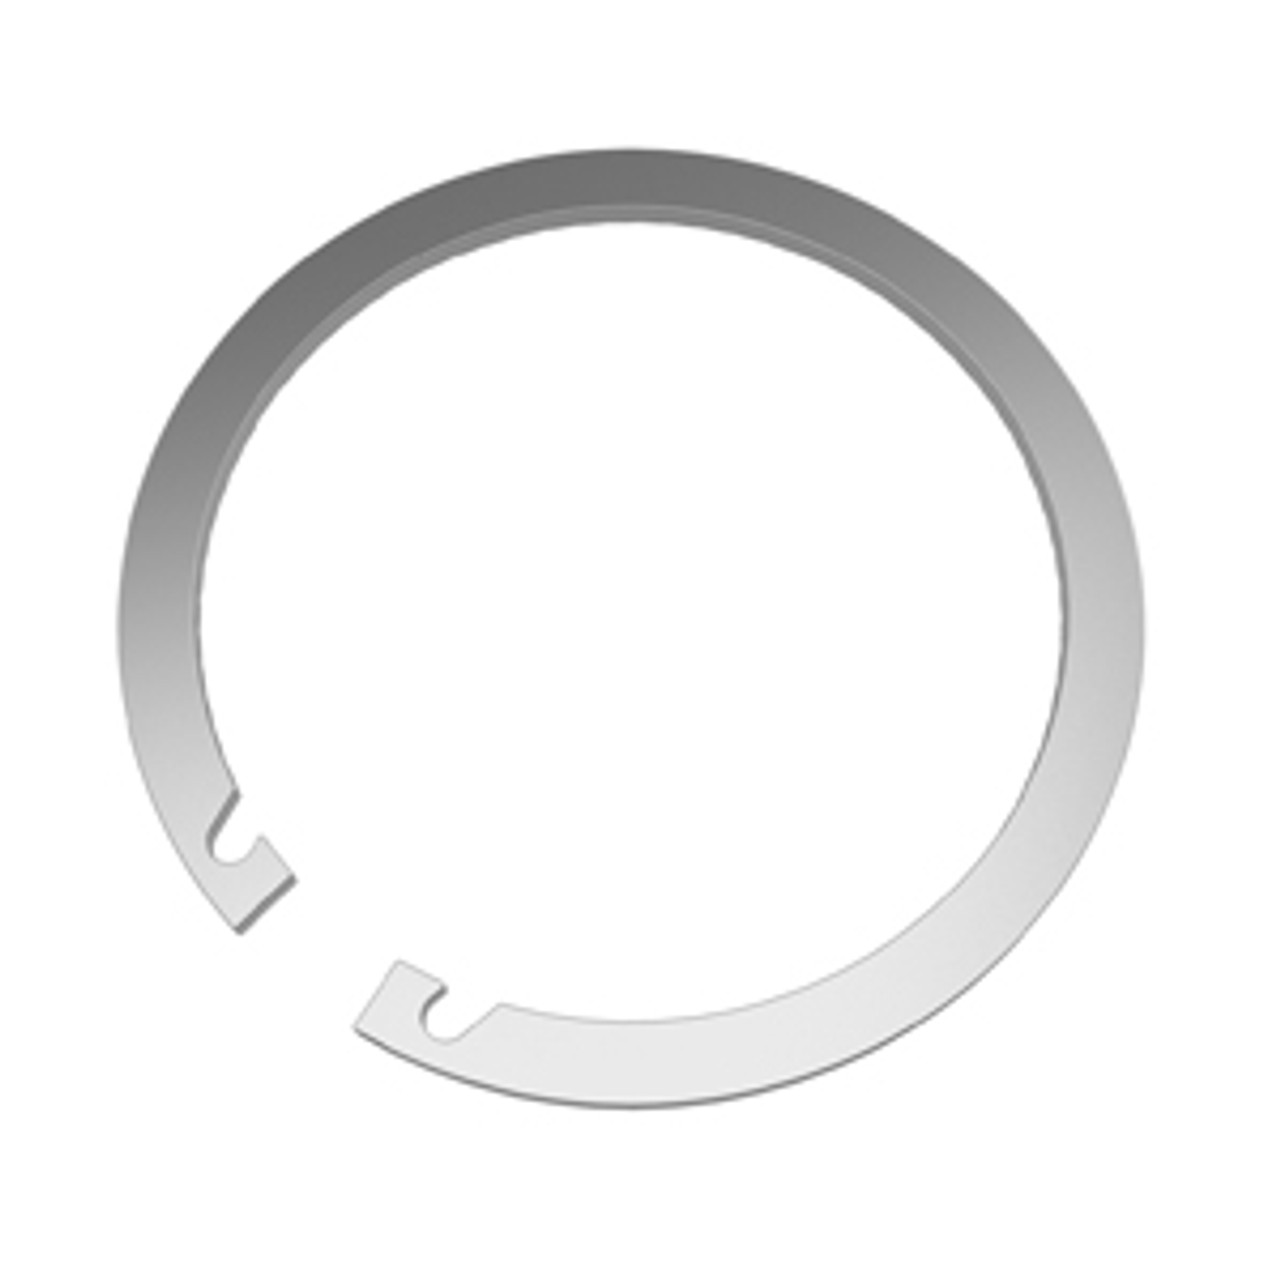 Internal Constant Section Retaining Ring  IN-0200